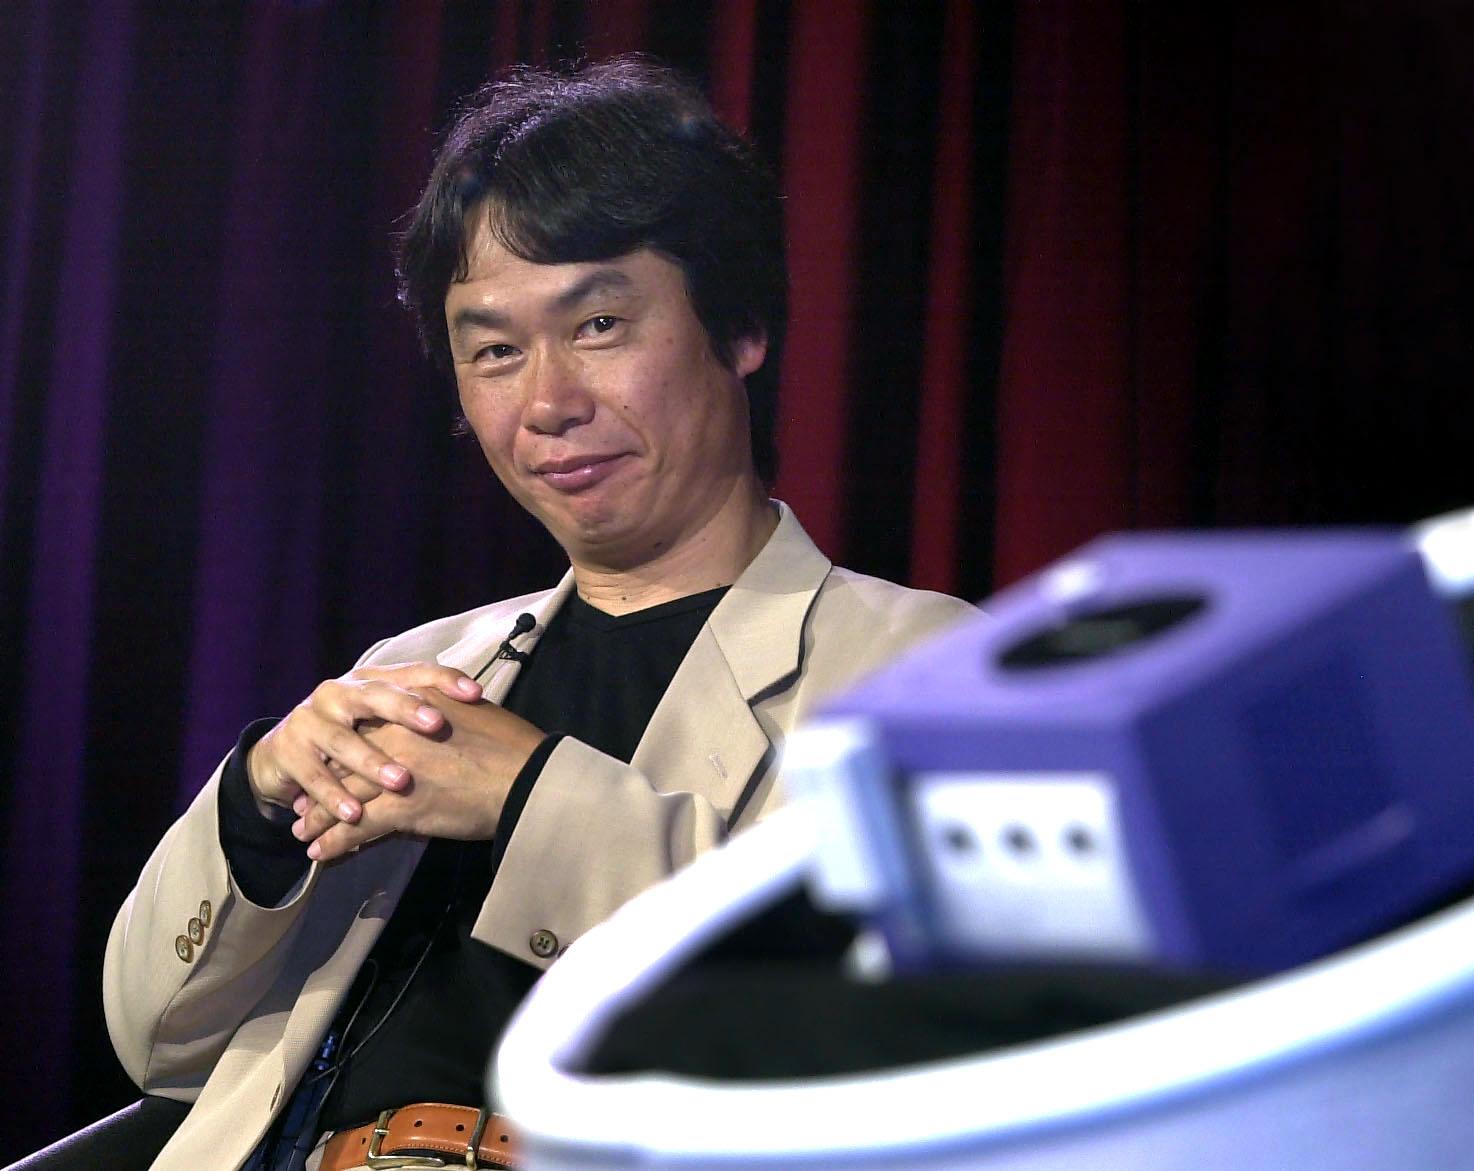 Shigeru Miyamoto looking at the Nintendo Gamecube, foreground, during the console’s reveal in May 2001